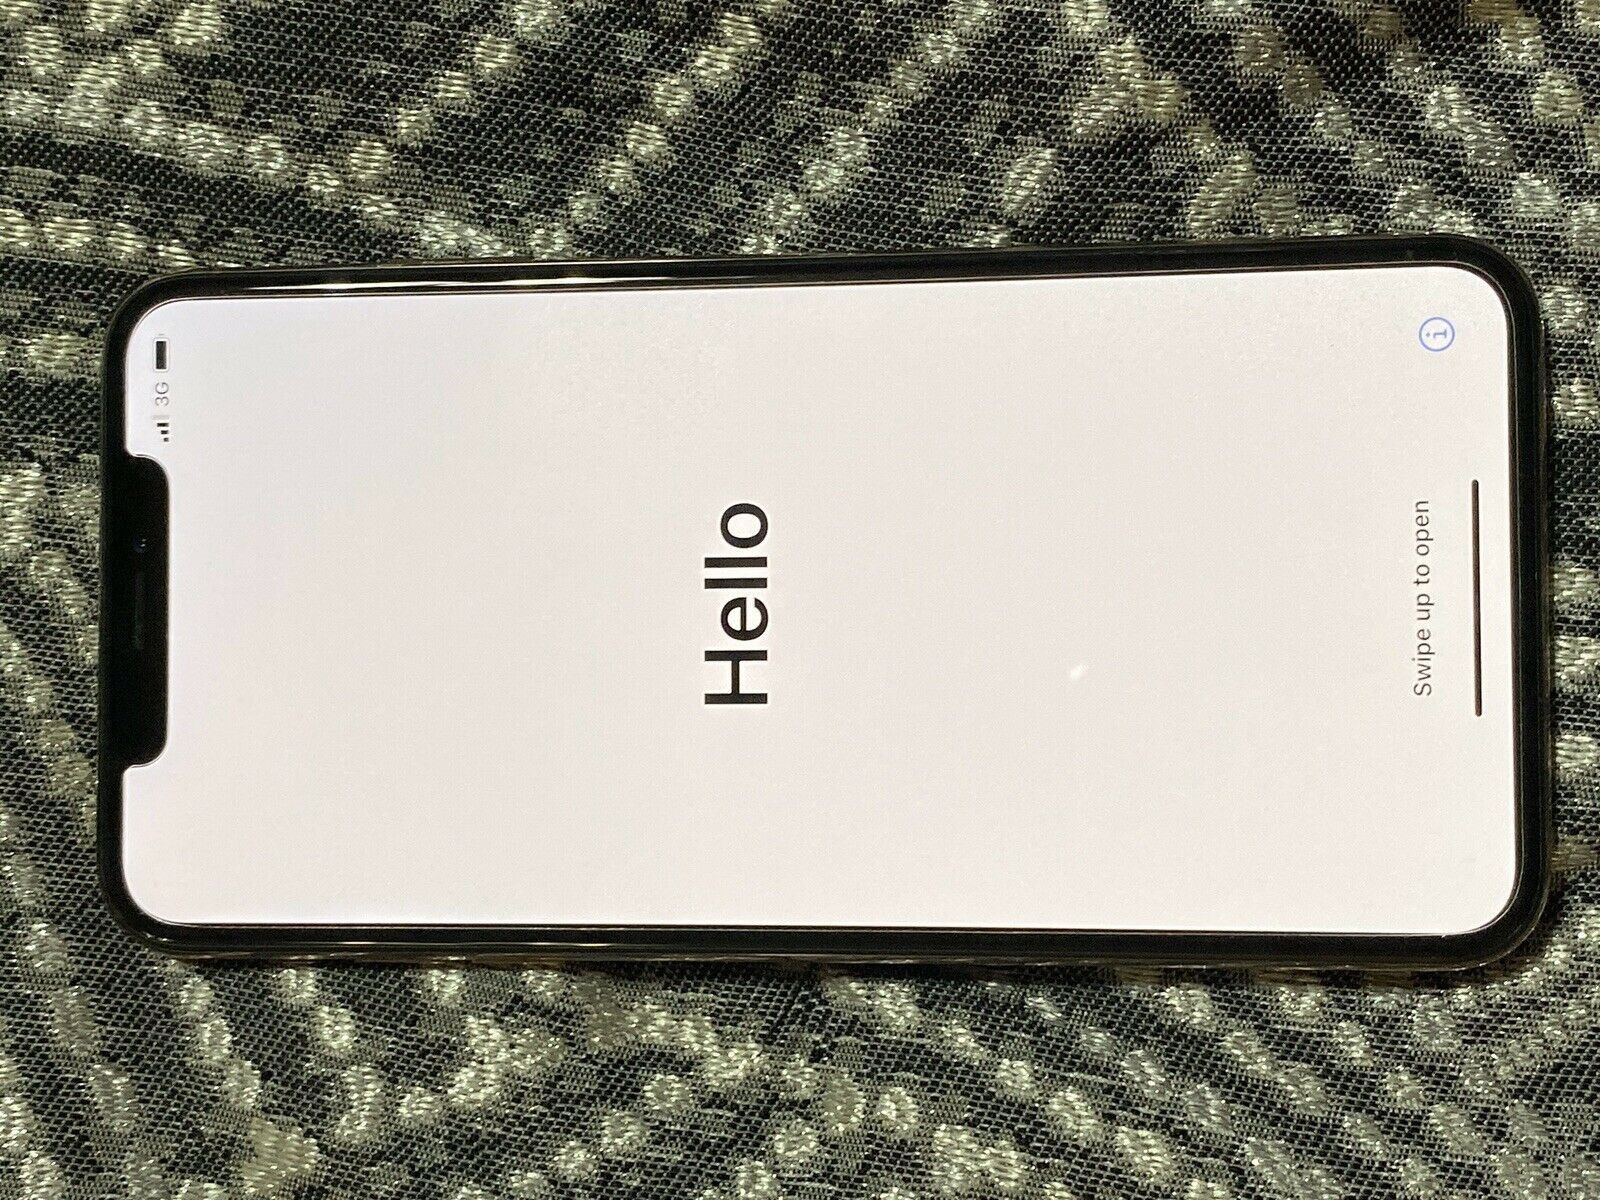 IPhone xs max (near mint) [WILL SHIP OUT]